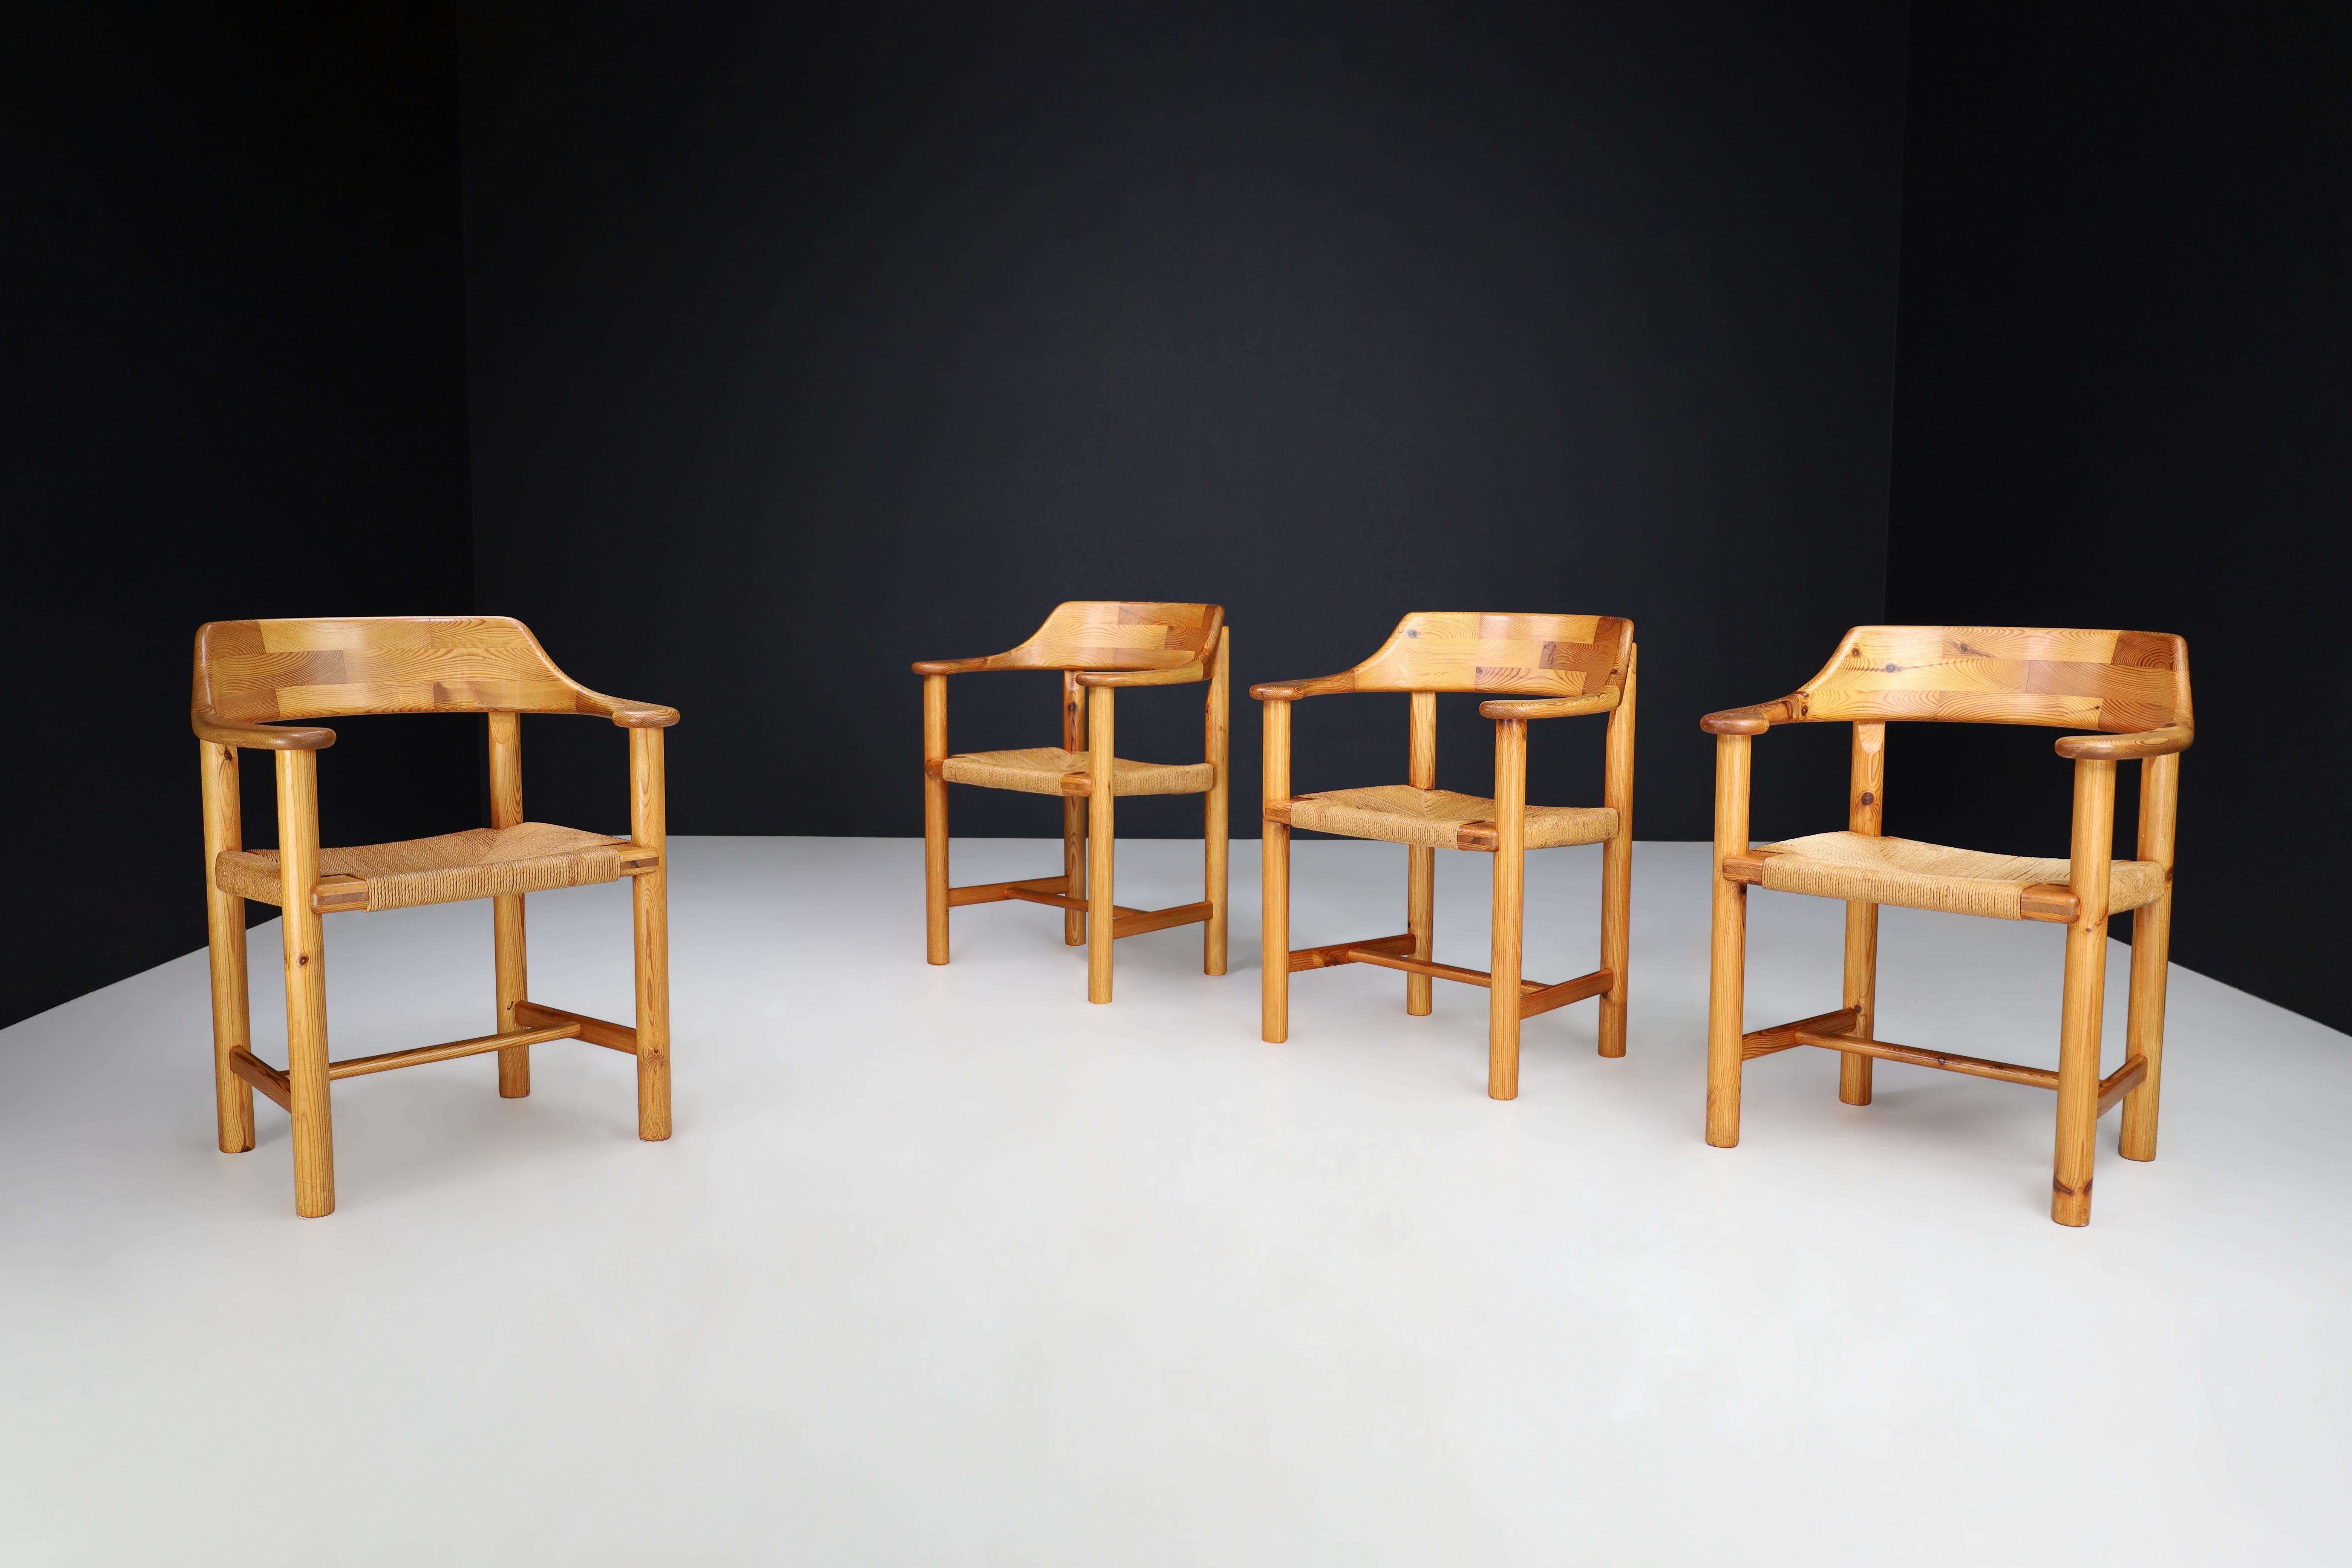 Rainer Daumiller Set of Four Dining Chairs in Solid Pine and Cord Seating, Sweden 1970s

These four modern Scandinavian dining chairs are reminiscent of the work of Danish designer Rainer Daumiller. They are a rare find, crafted from solid pine and